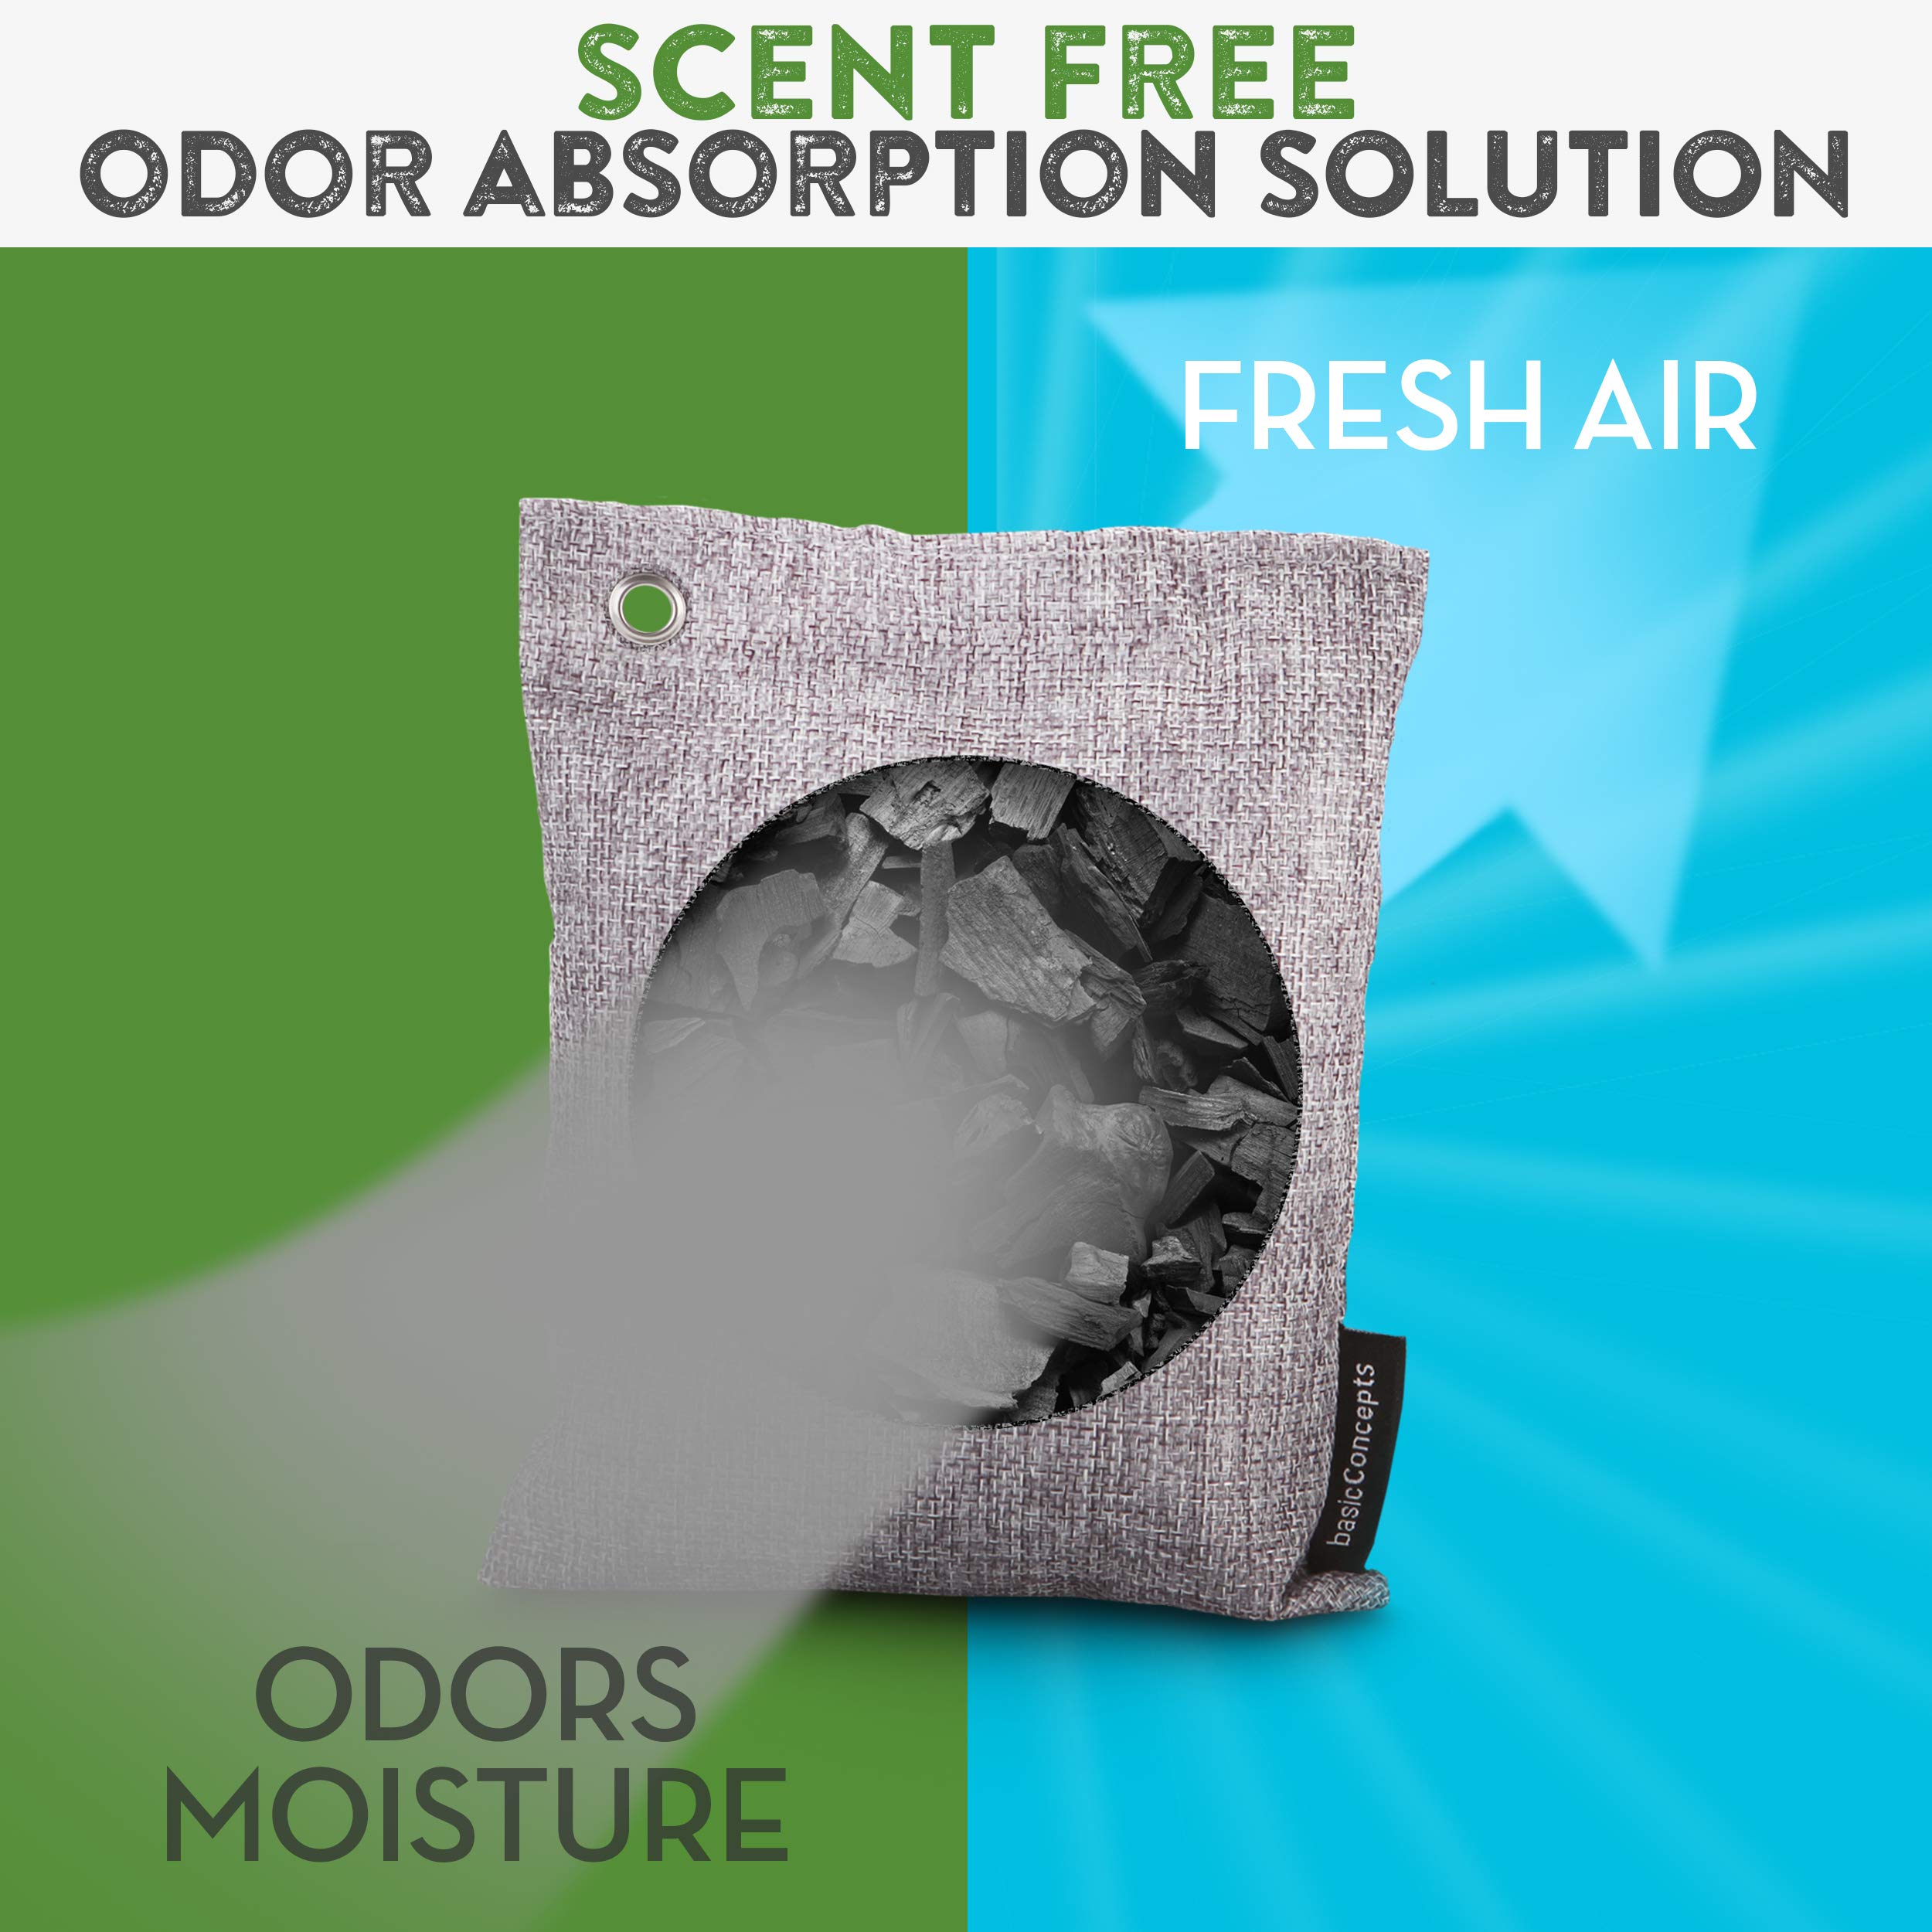 Charcoal Odor Absorber for Strong Odor (Large, 4 Pack, 200g each), Bamboo Charcoal Air Purifying Bag, Activated Charcoal Odor Absorber for Closet, Shoe, Car, Basement Musty Odor Eliminator Deodorizer